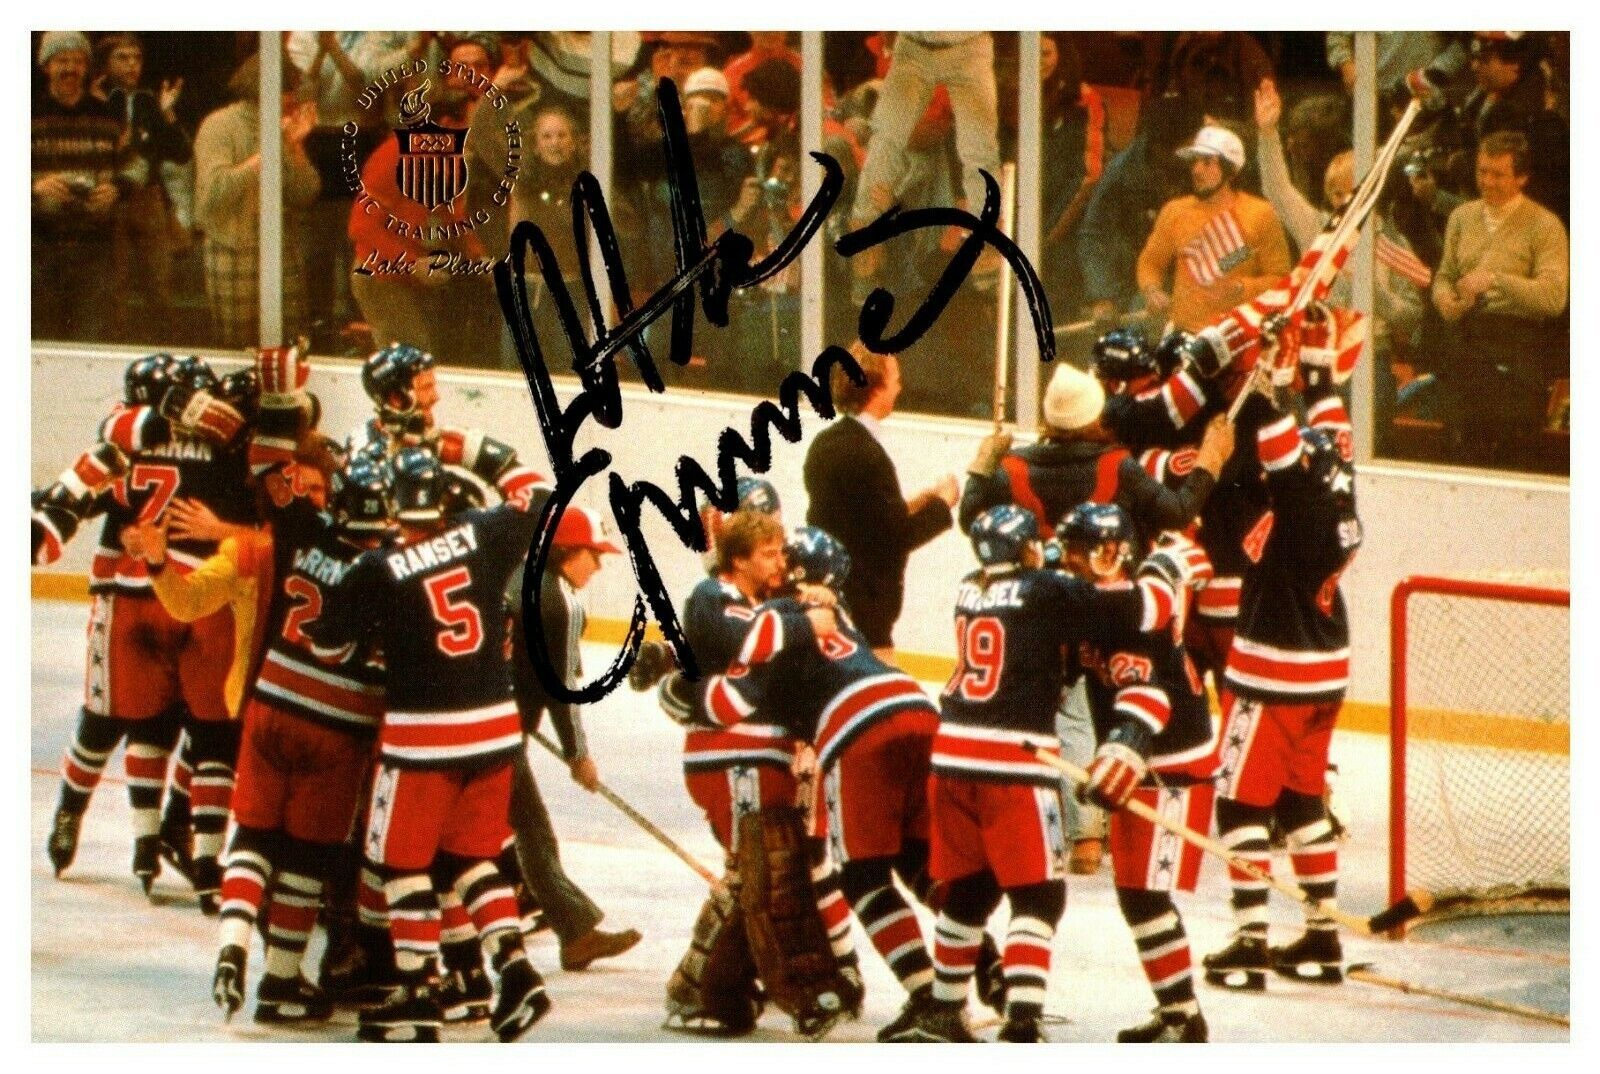 Mike Eruzione 1980 Gold Olympic Signed Autographed 4x6 Color Postcard